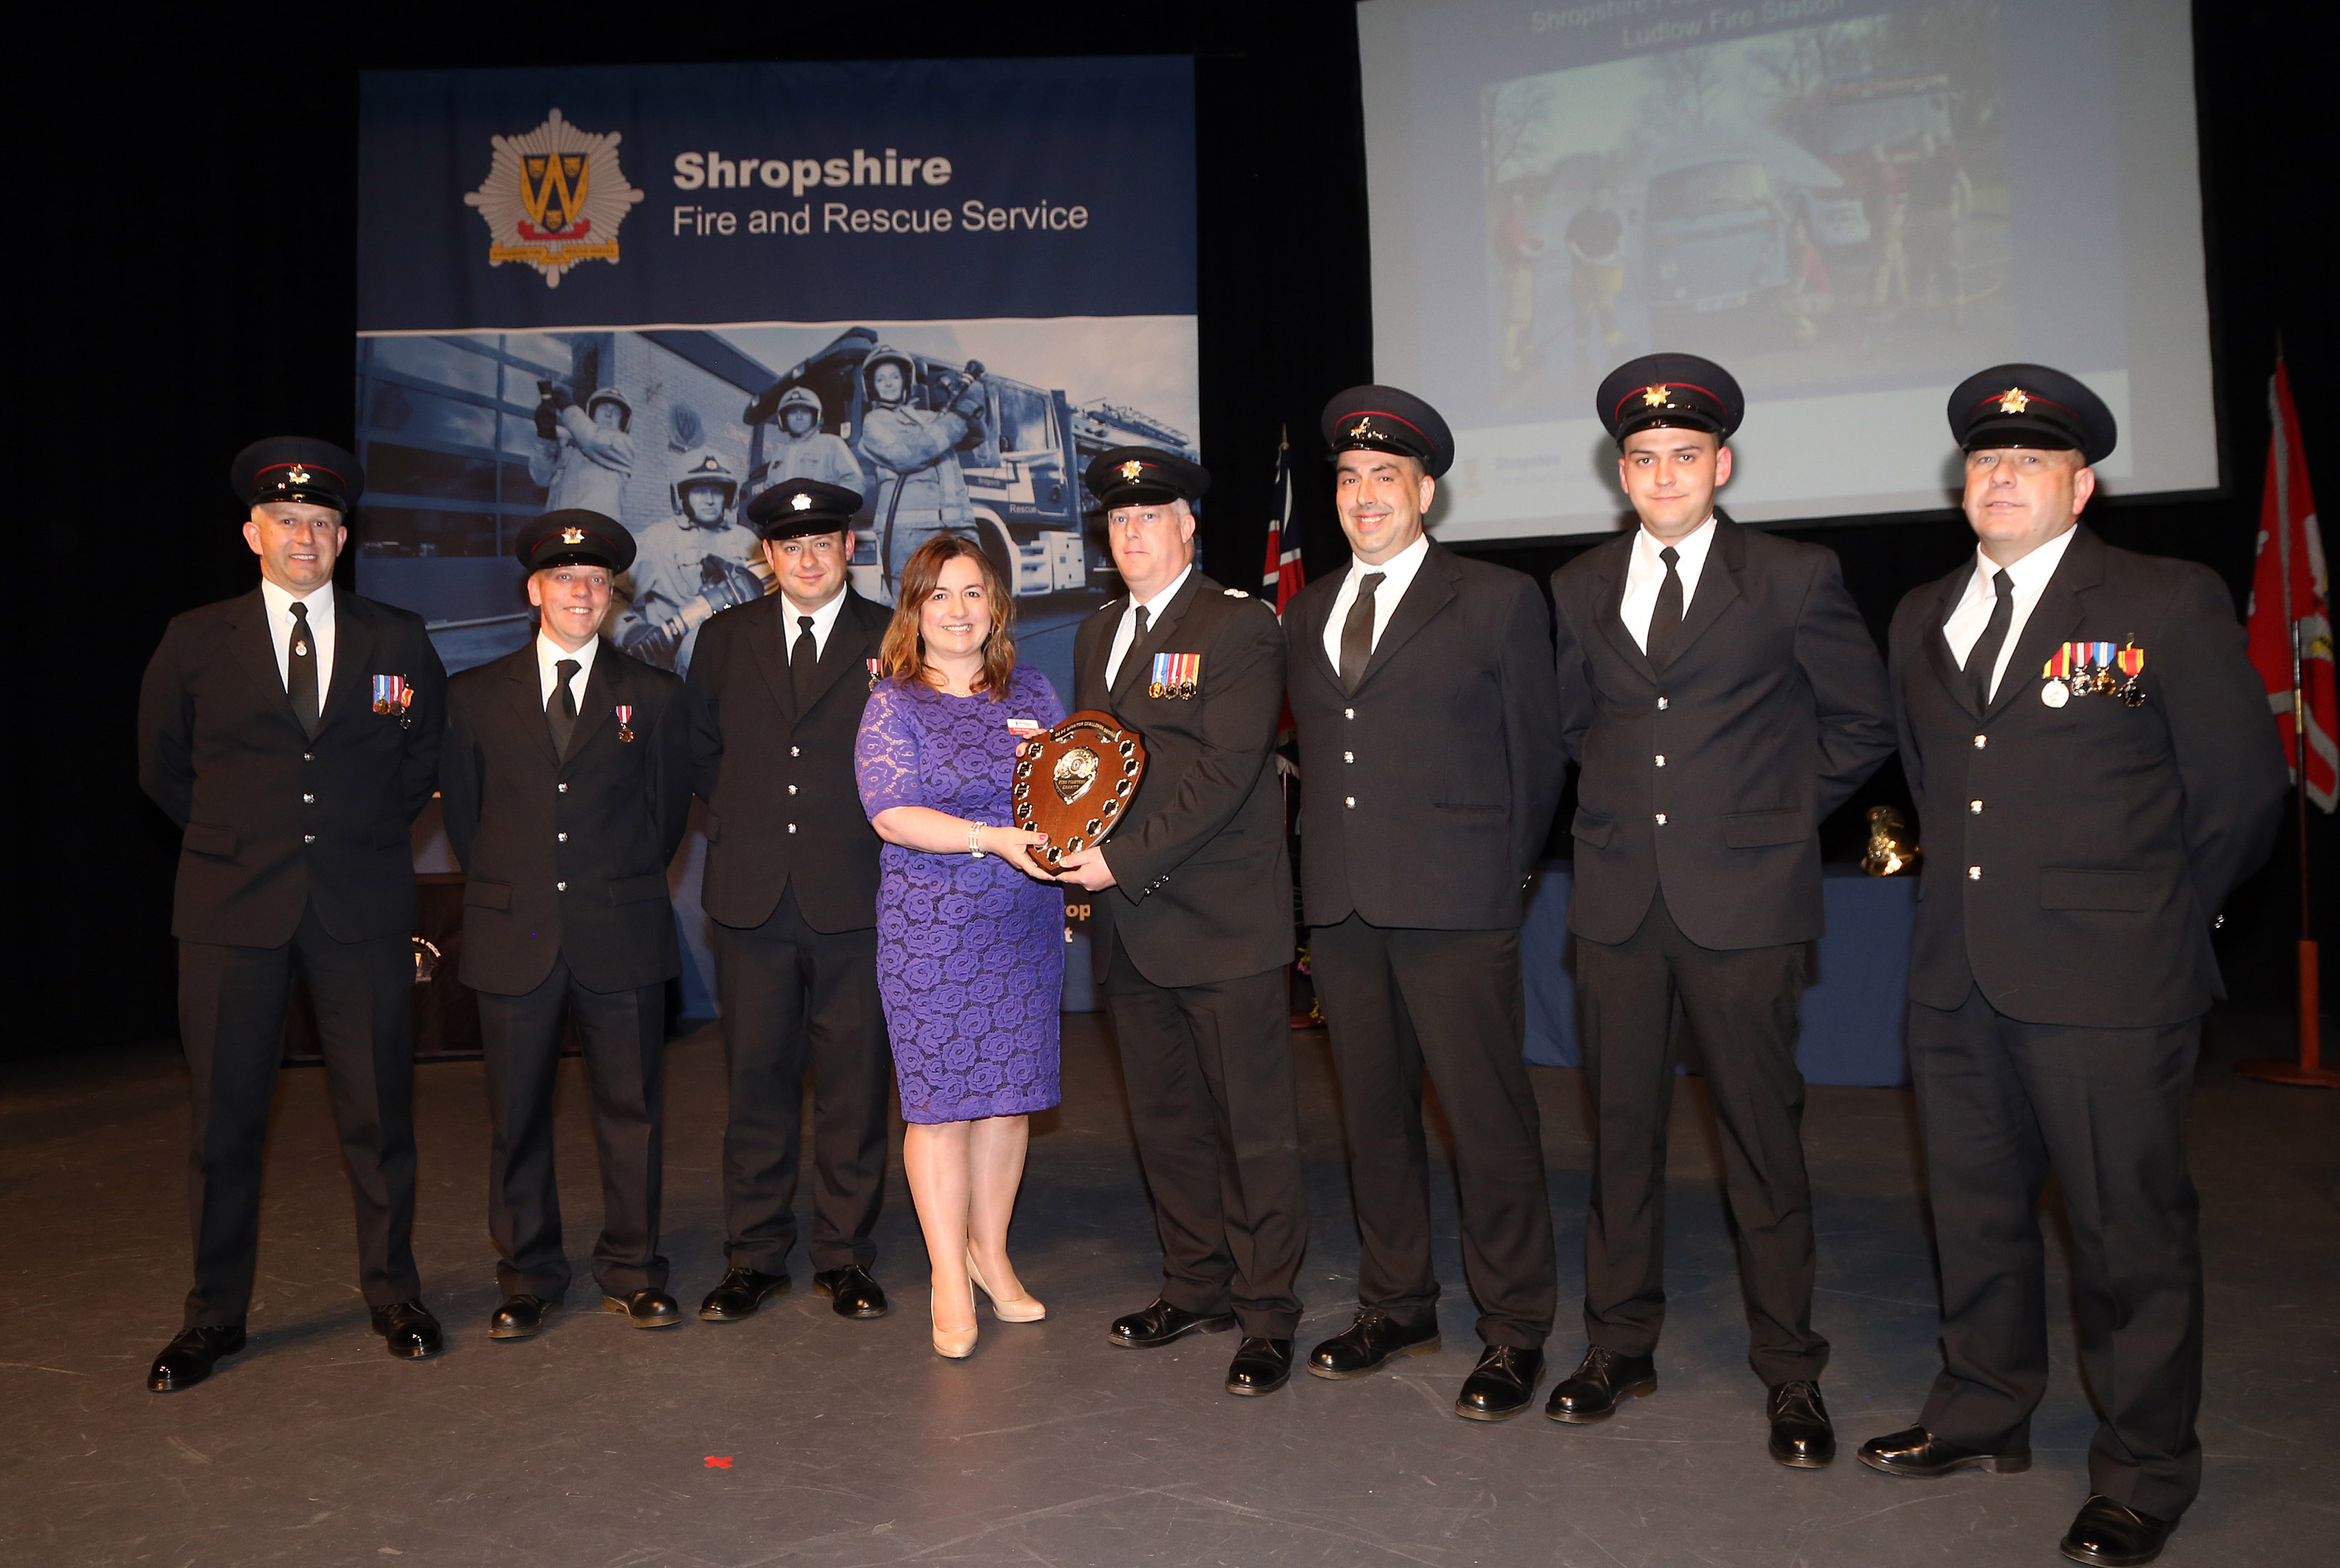 Ludlow Fire Station was awarded the Dave Bishton Challenge Shield for raising more than £4,000 for the Fire Fighters Charity over the past year. Pictured are, left to right, Steve Perks, Mark Nicholas, Ashley Brown, Charity fundraising officer Debbie Rushbrooke, Watch Manager Glyn Davies, Shaun Harrison, Olie Powis and Graham Oliver.